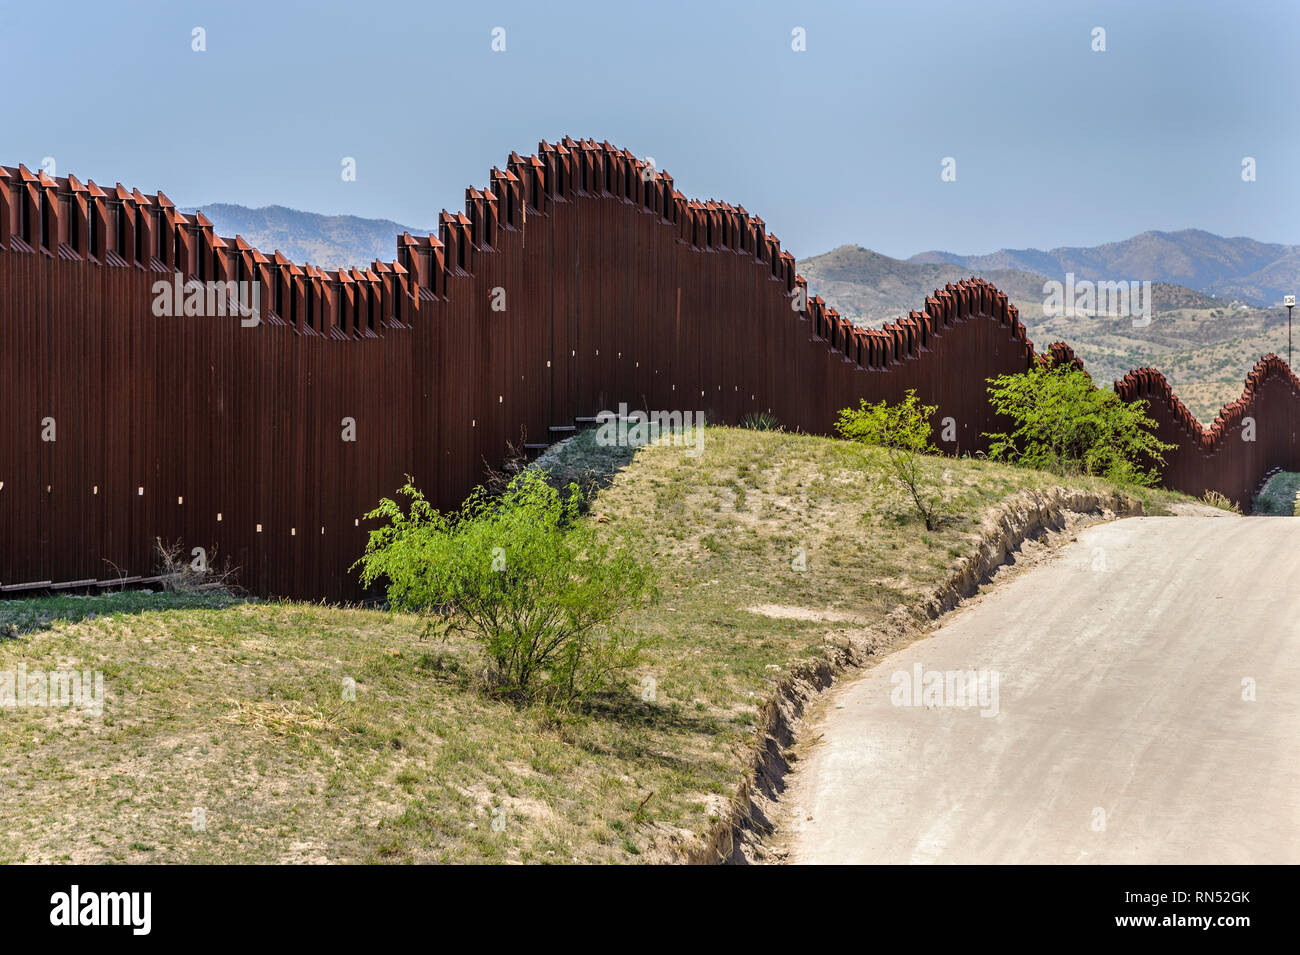 US border fence on Mexico boundary, tall bollard style pedestrian barrier, viewed from US side looking west, east of Nogales Arizona, April 2018 Stock Photo